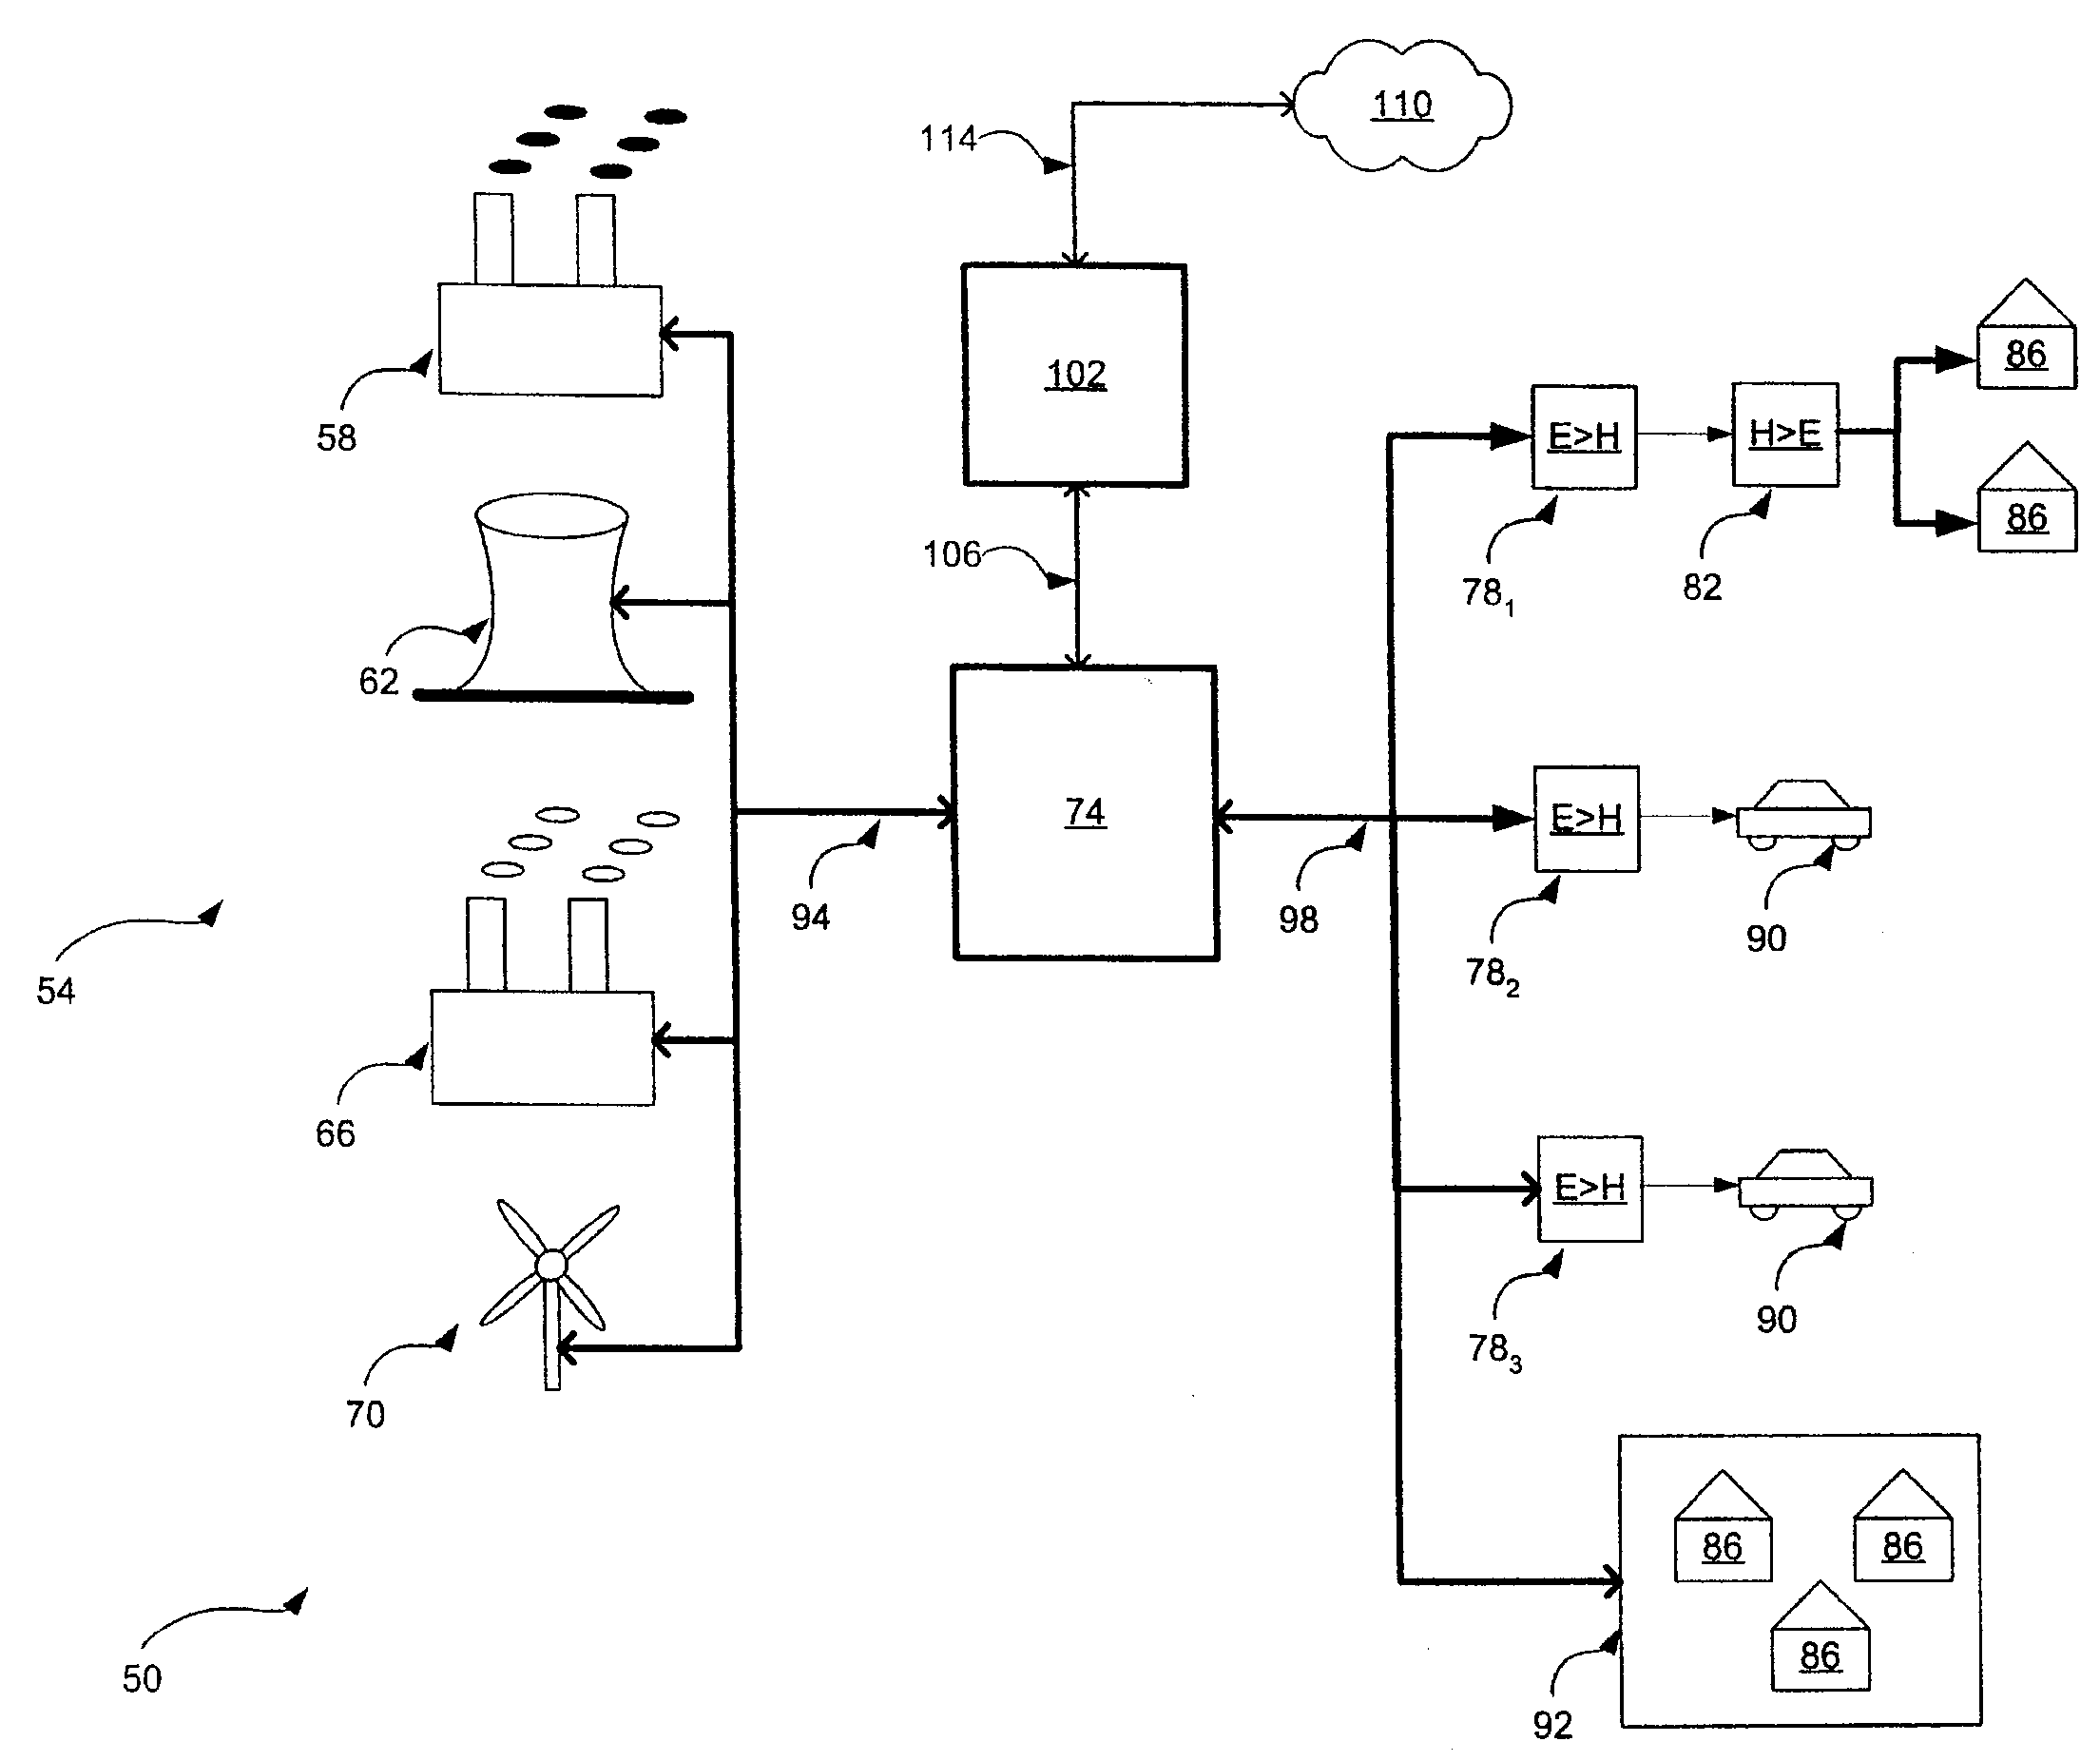 Energy network using electrolysers and fuel cells